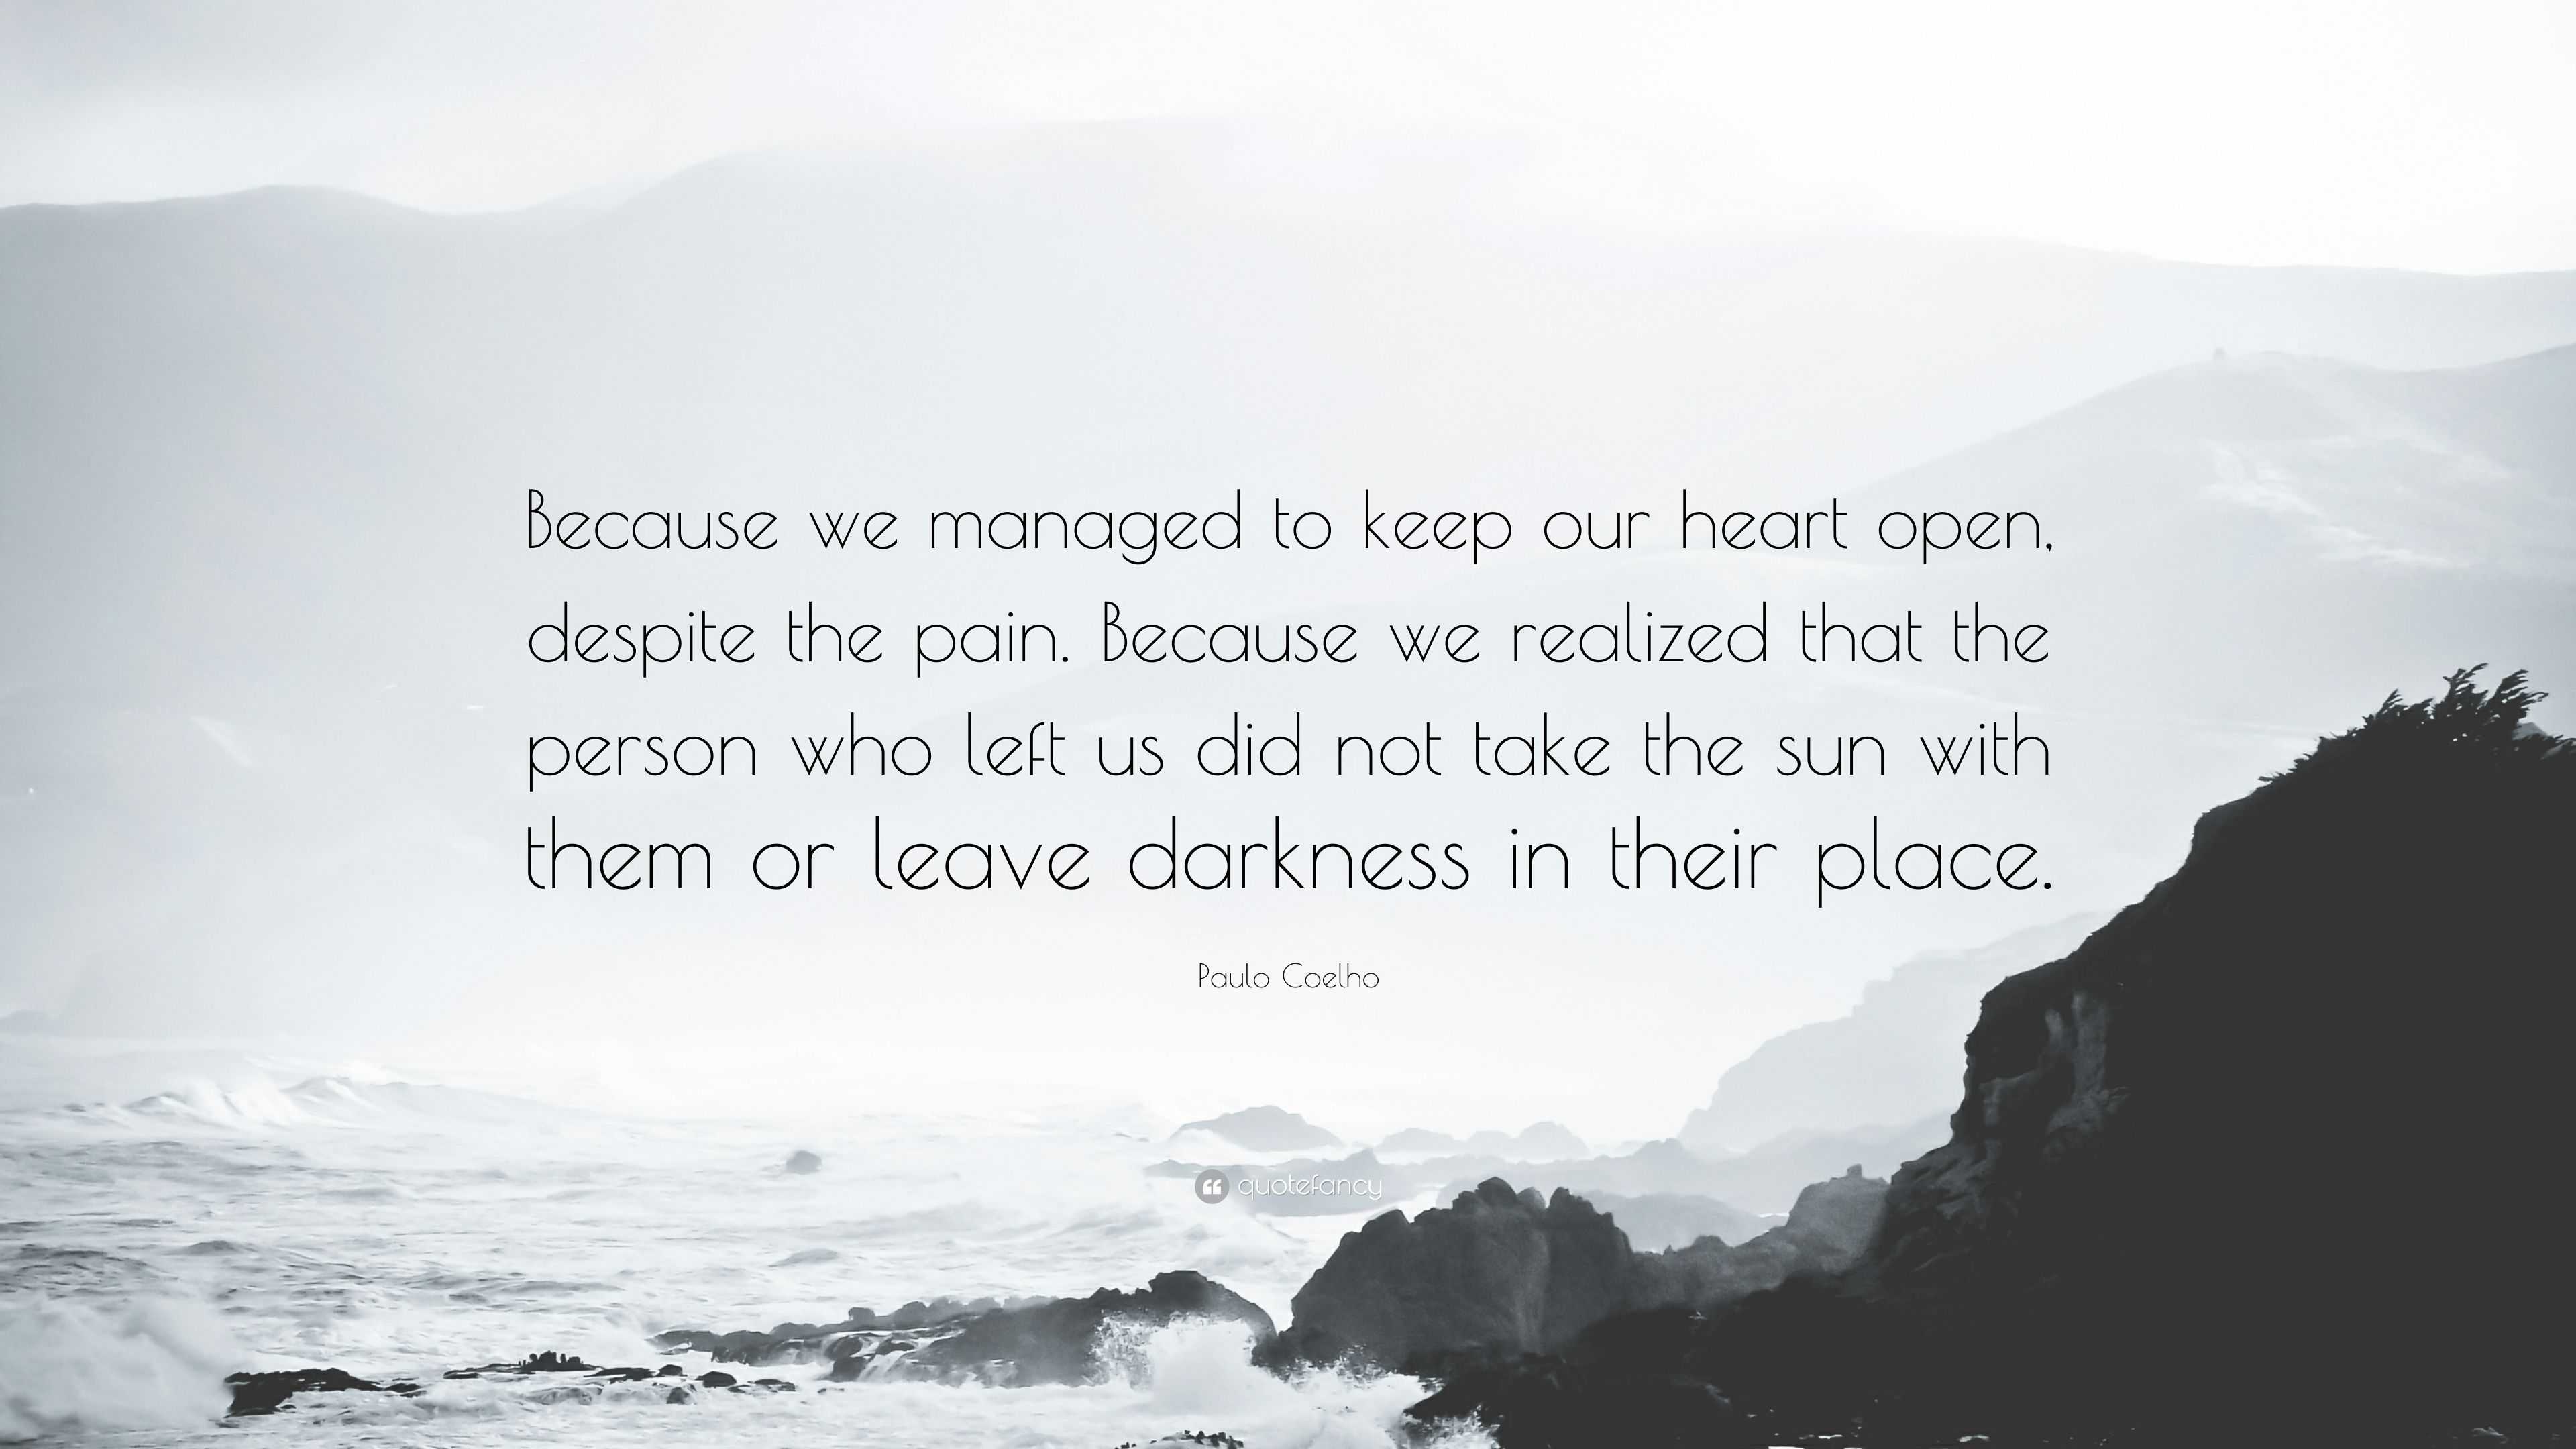 https://quotefancy.com/media/wallpaper/3840x2160/5653717-Paulo-Coelho-Quote-Because-we-managed-to-keep-our-heart-open.jpg